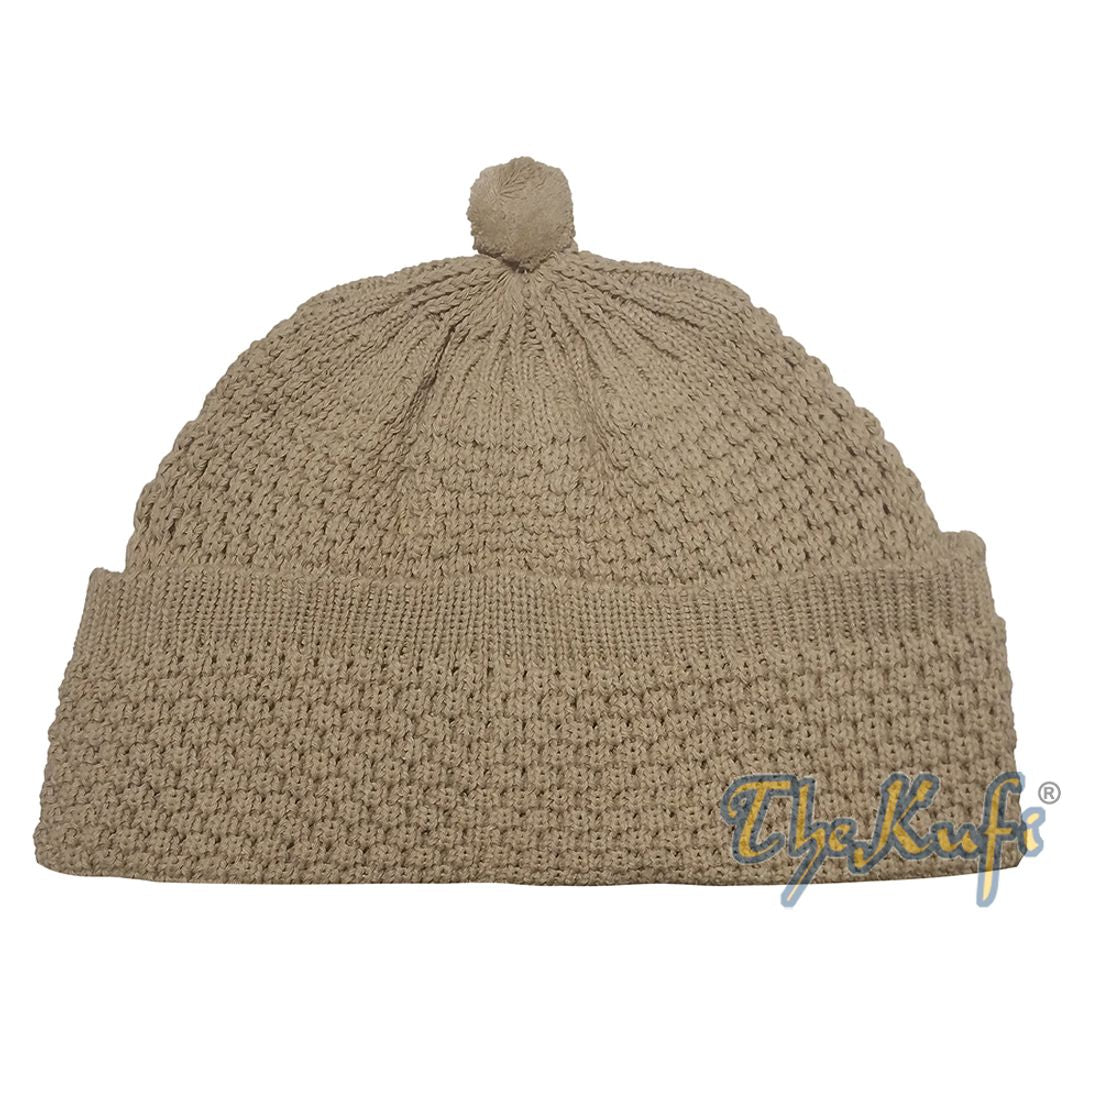 One-size Light Brown Thick-weave Stretchy Double Layer Warm Cotton-acrylic Beanie Hat with Pompom